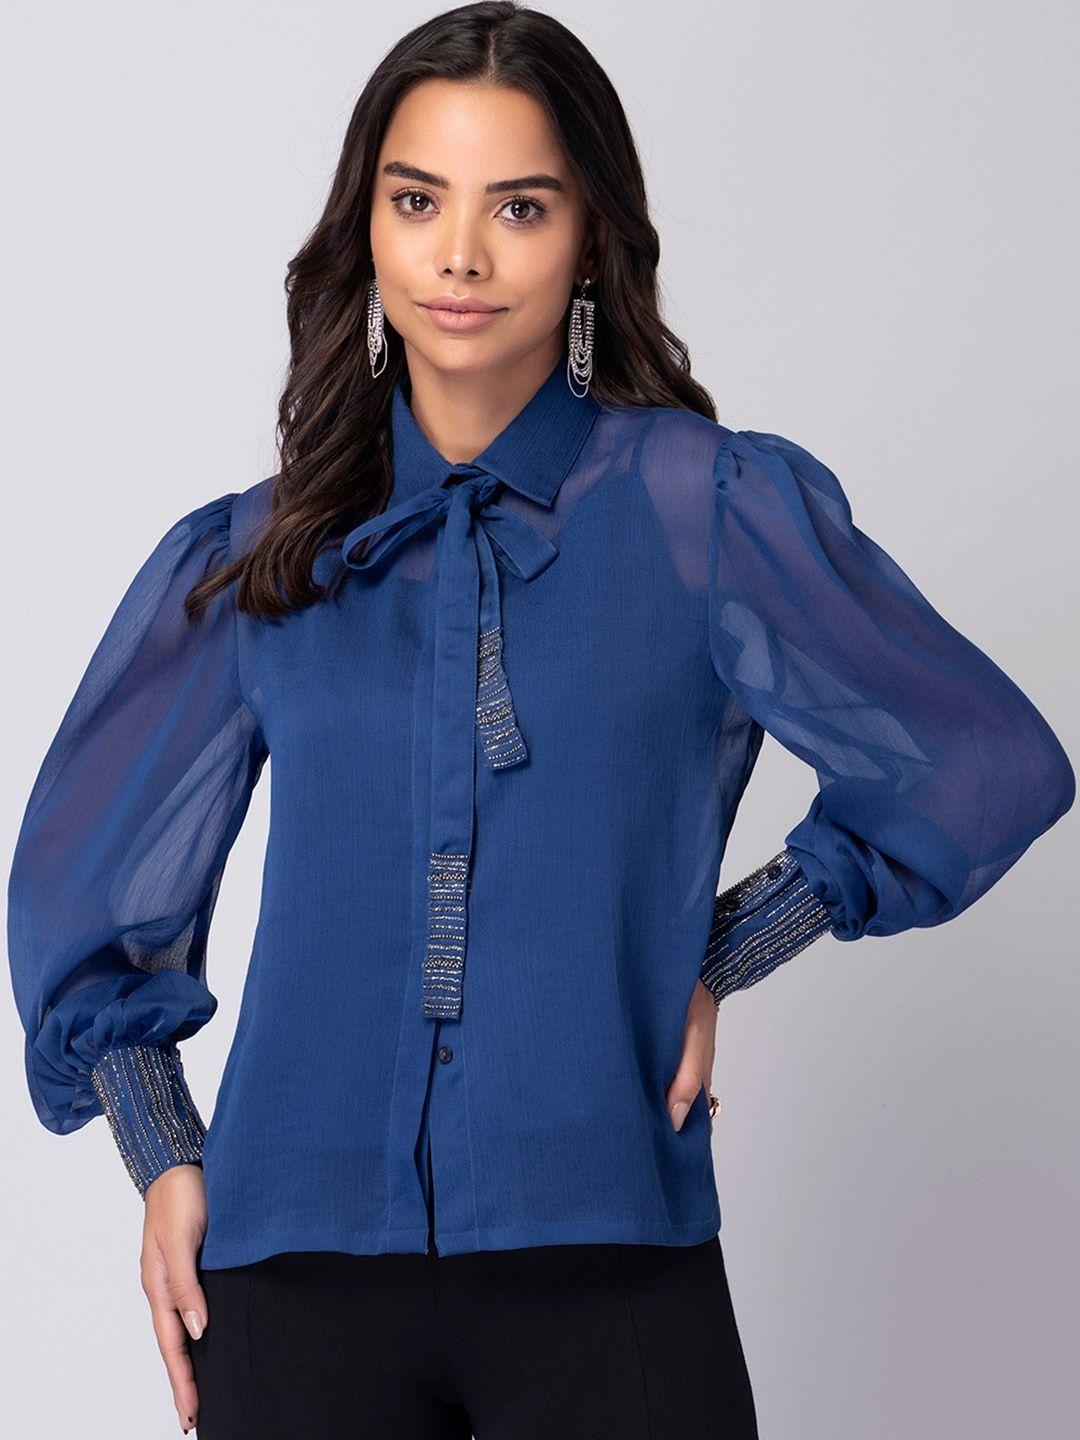 faballey tie-up neck georgette shirt style top